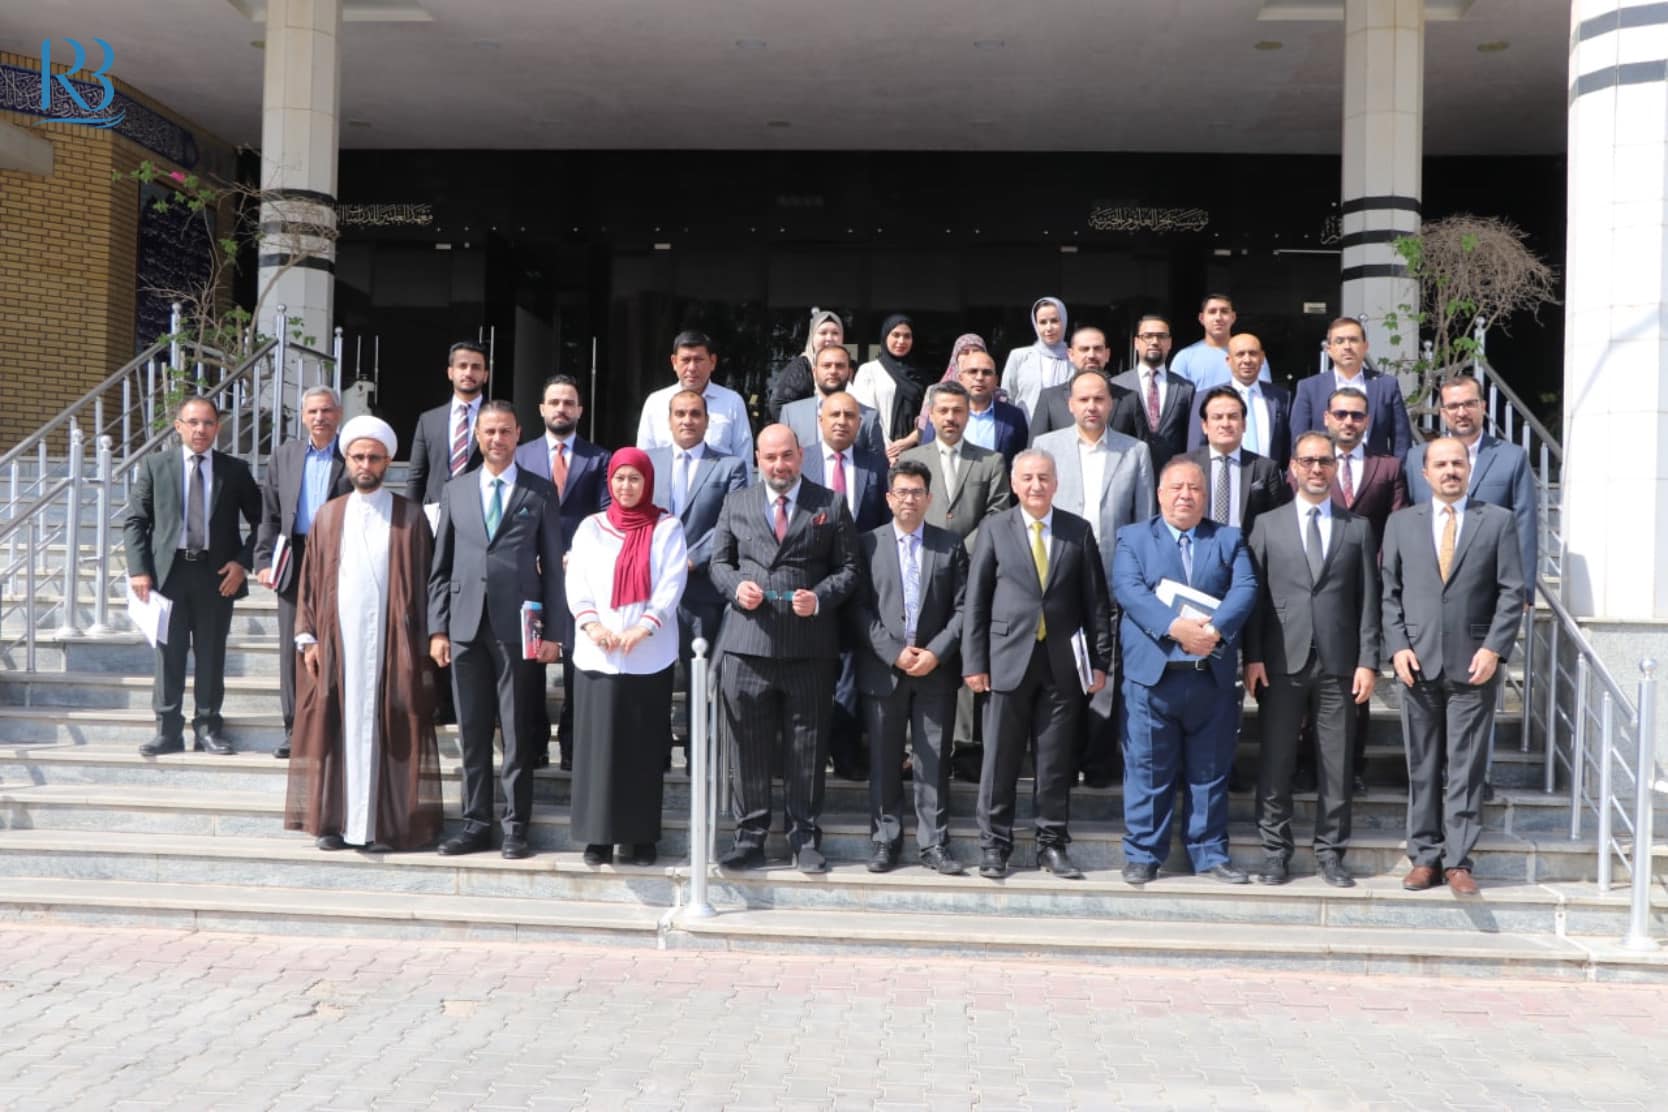 Rewaq Baghdad Center for Public Policy held the seventh dialogue symposium on evaluating the performance of the 2005 Iraqi Constitution.